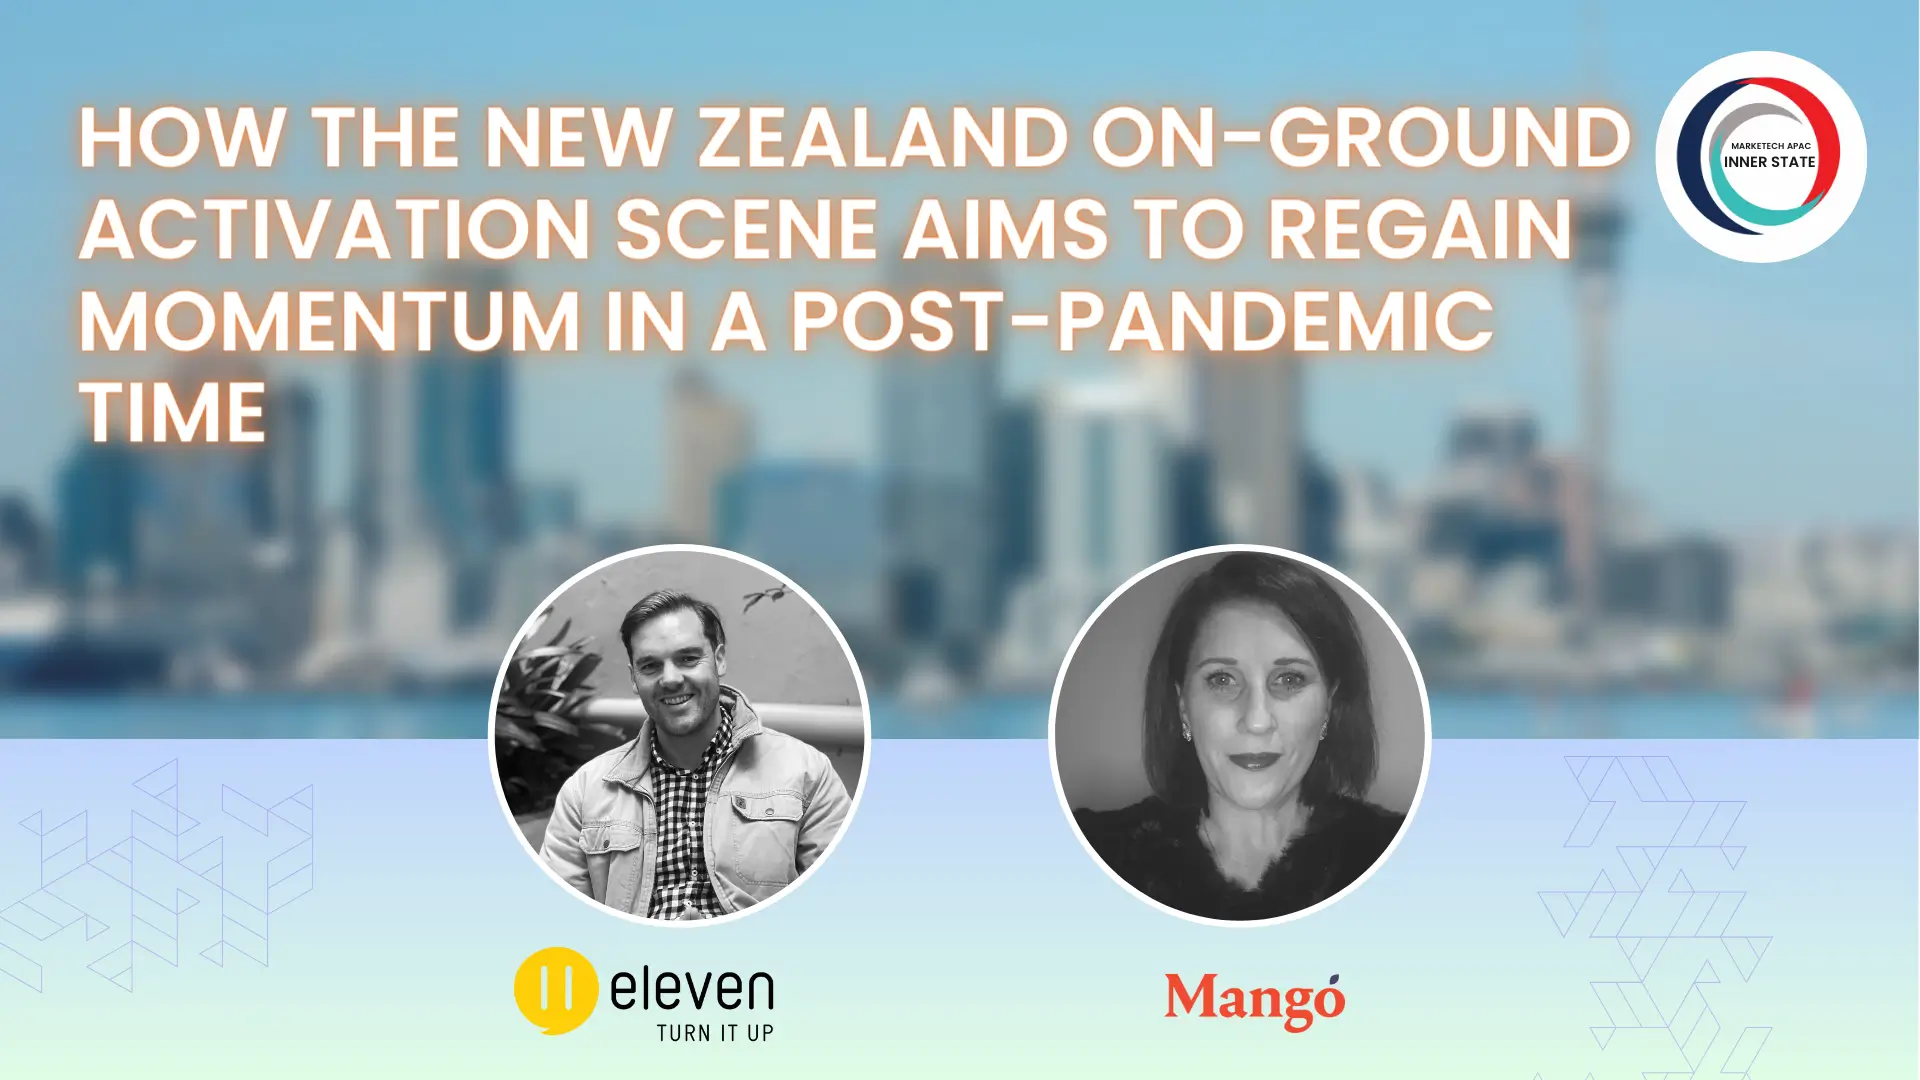 How the New Zealand on-ground activation scene aims to regain momentum in a post-pandemic time